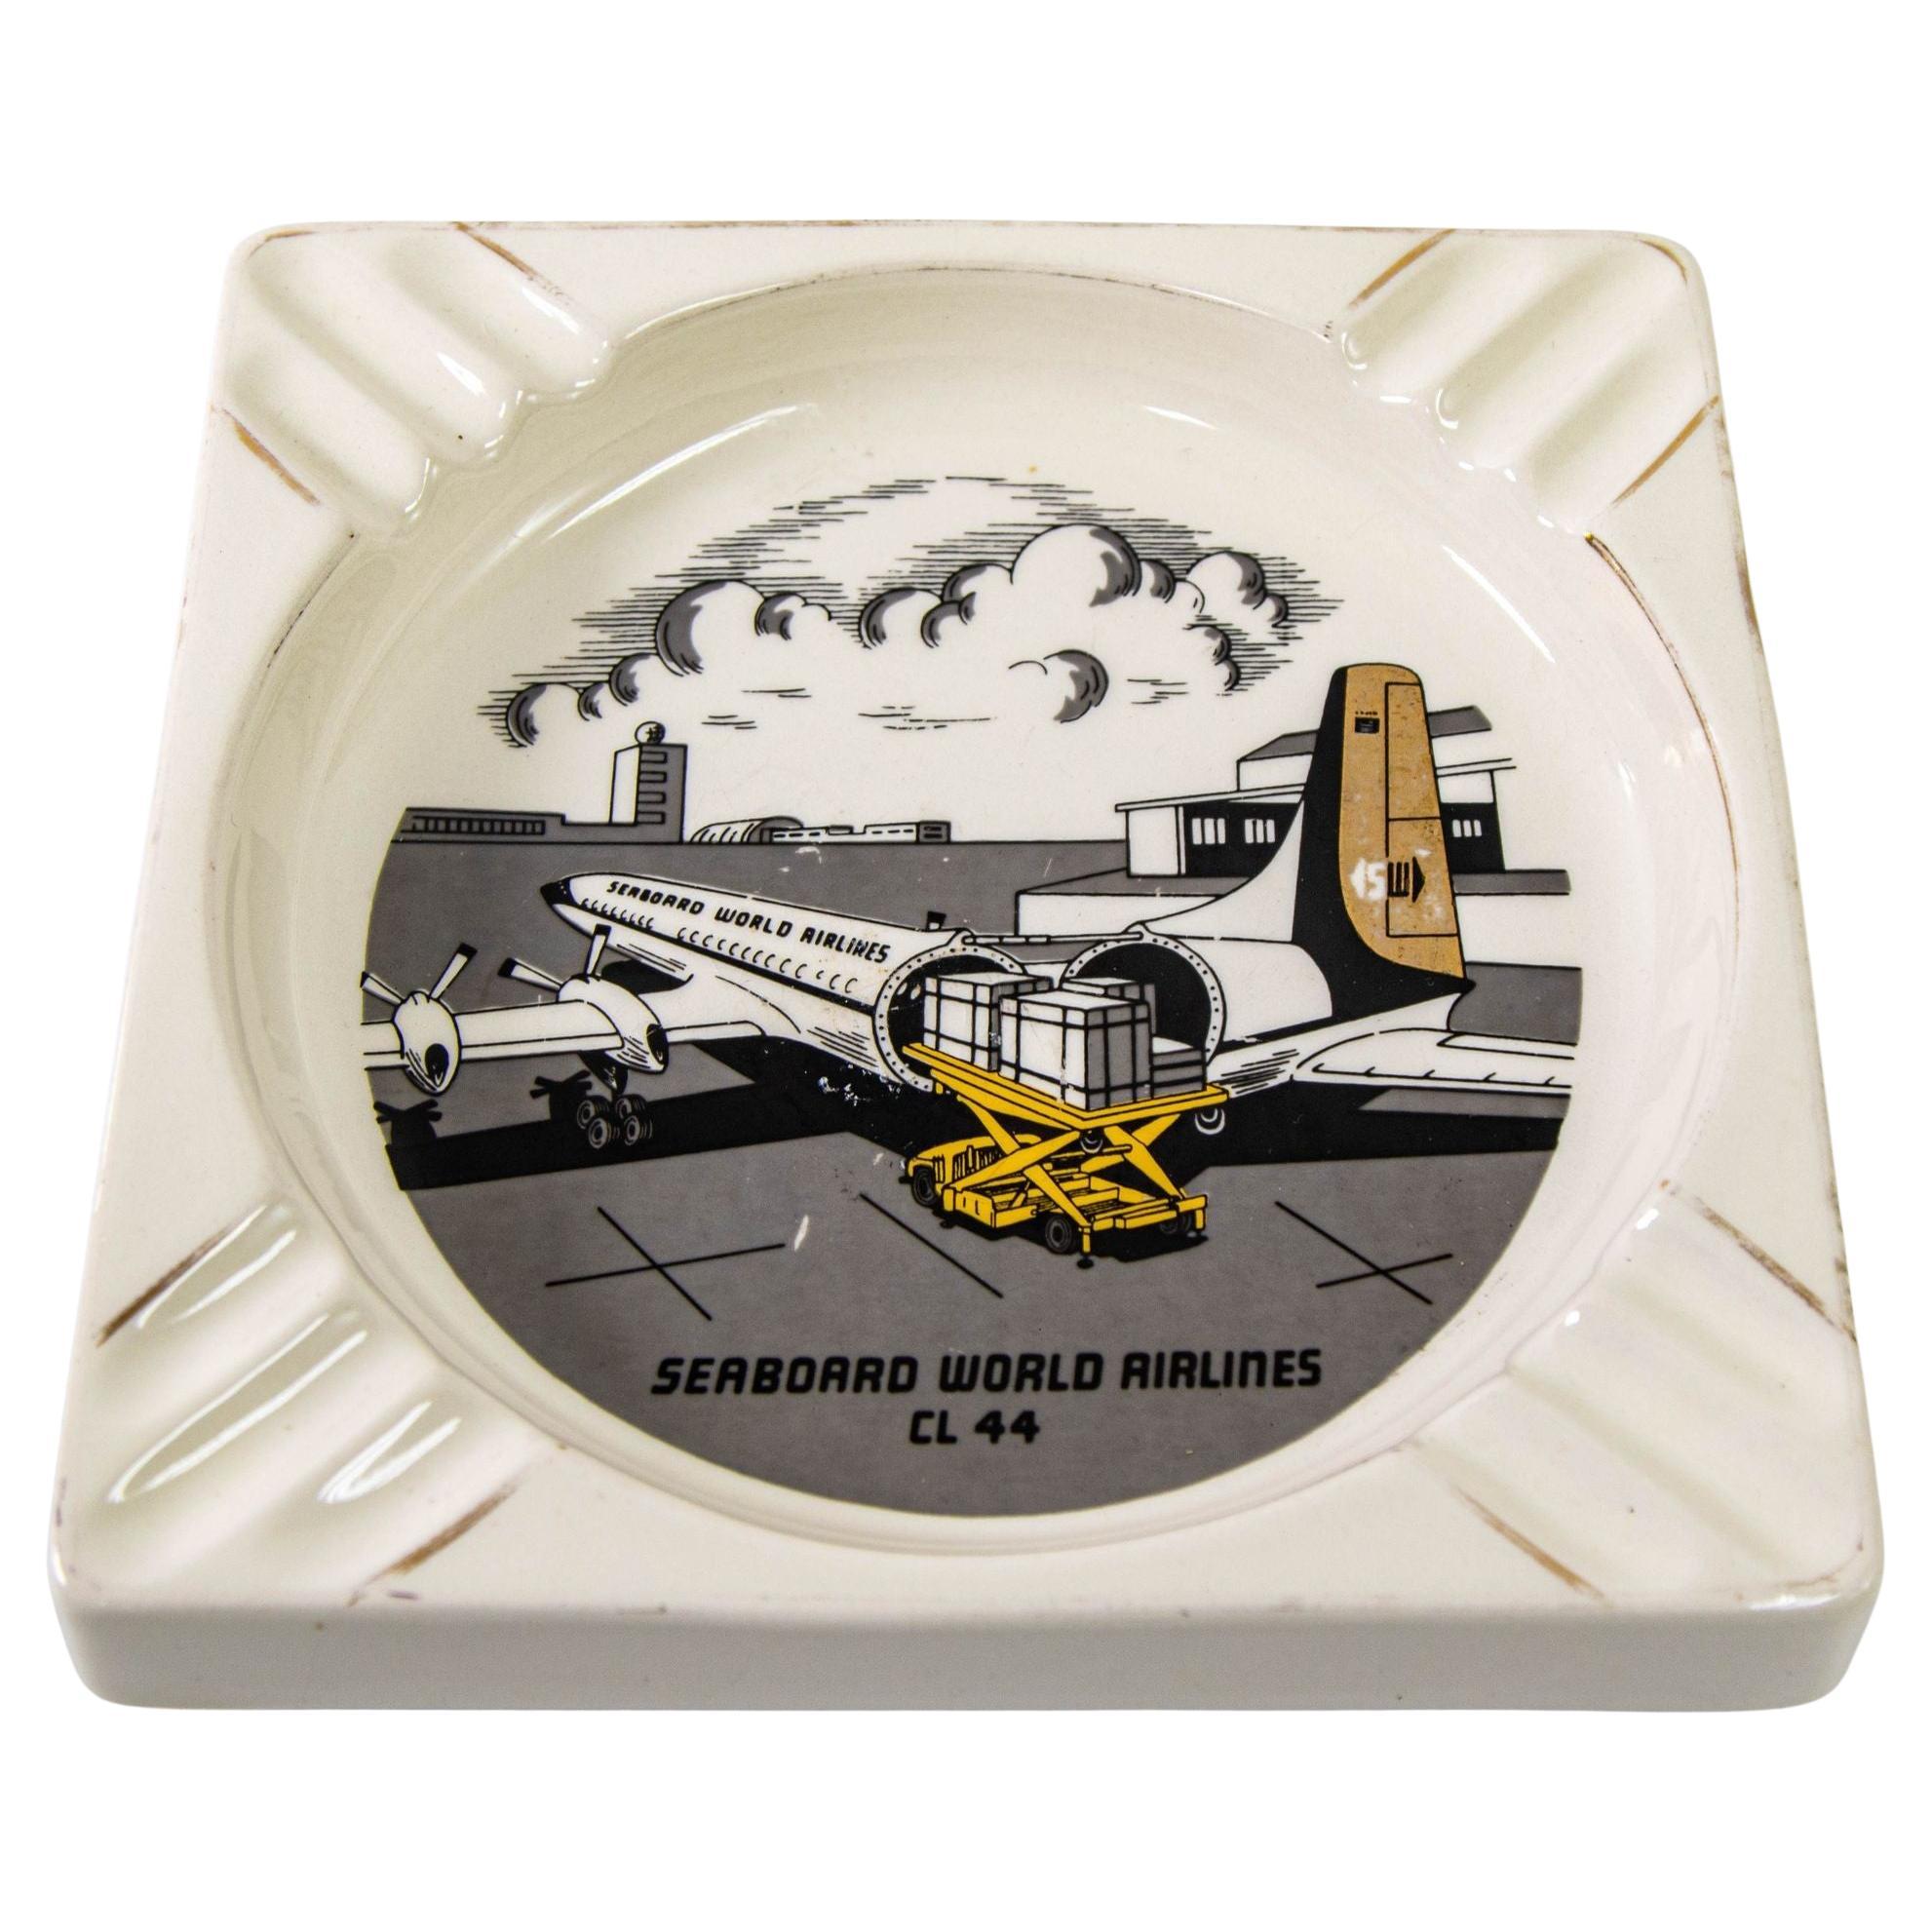 1960s " Seaboard World Airlines CL44" Advertising Ashtray By Salem Ceramic. For Sale